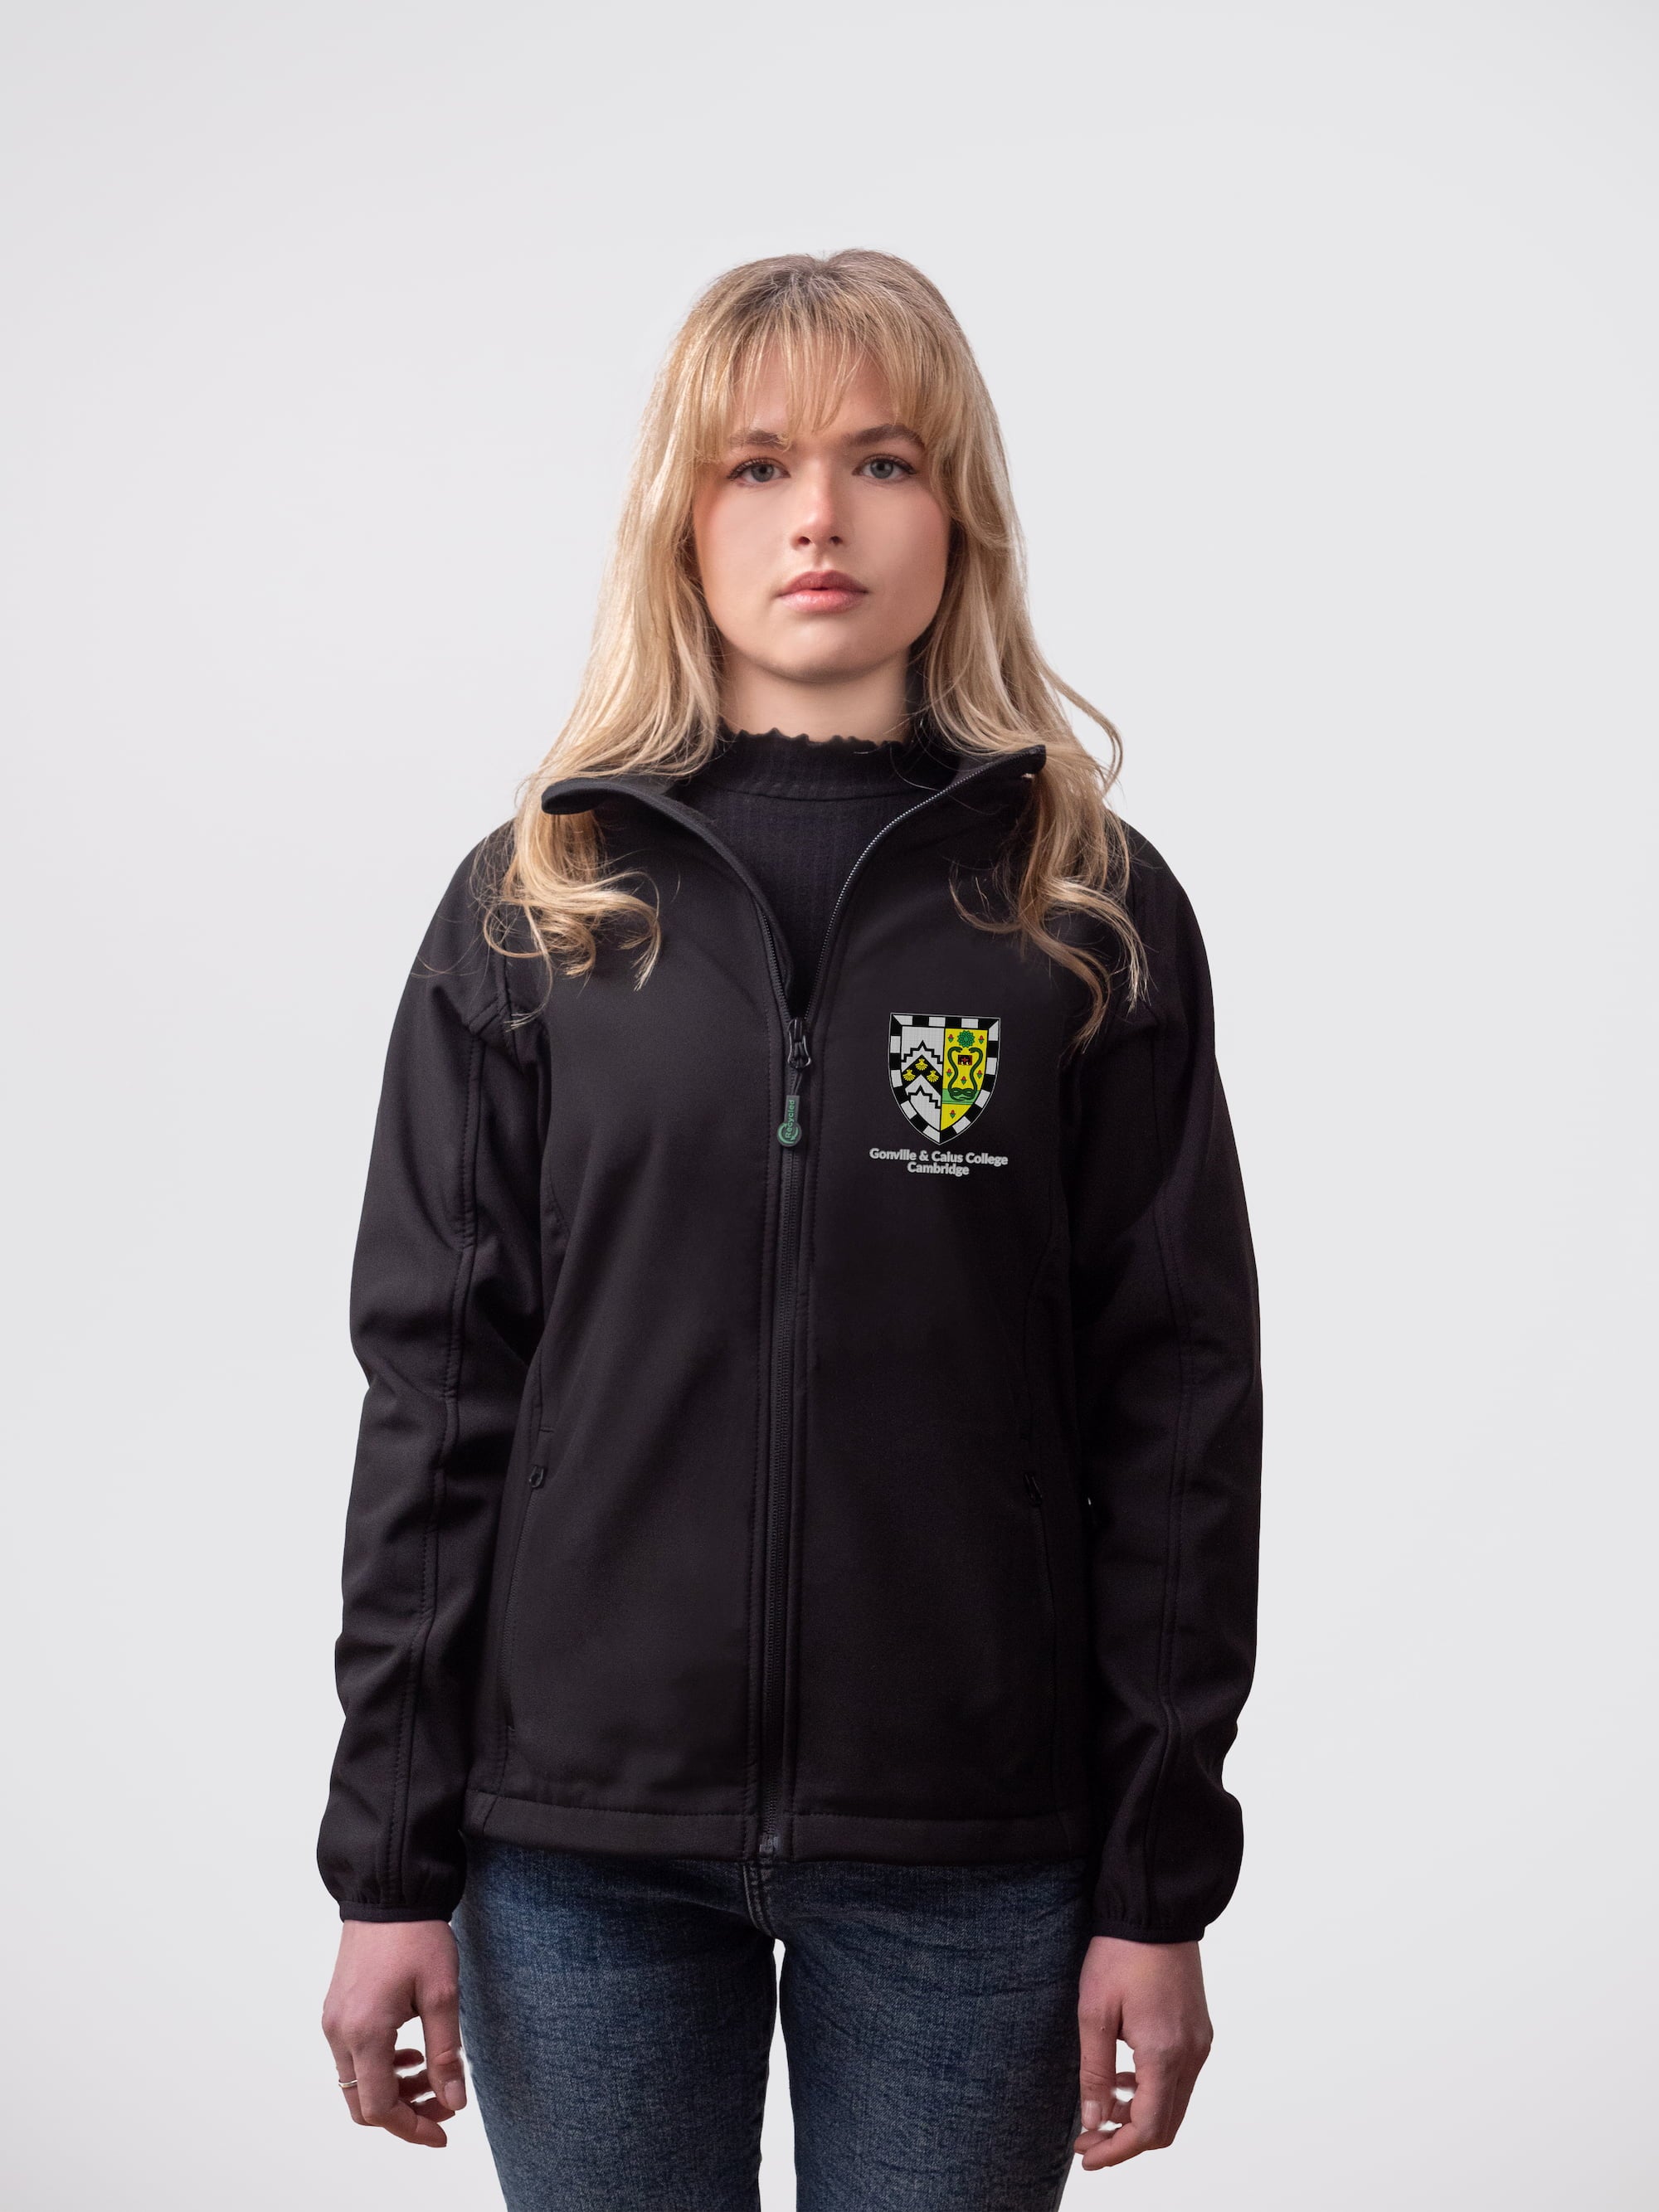 A student wearing a sustainable, Gonville & Caius College embroidered jacket